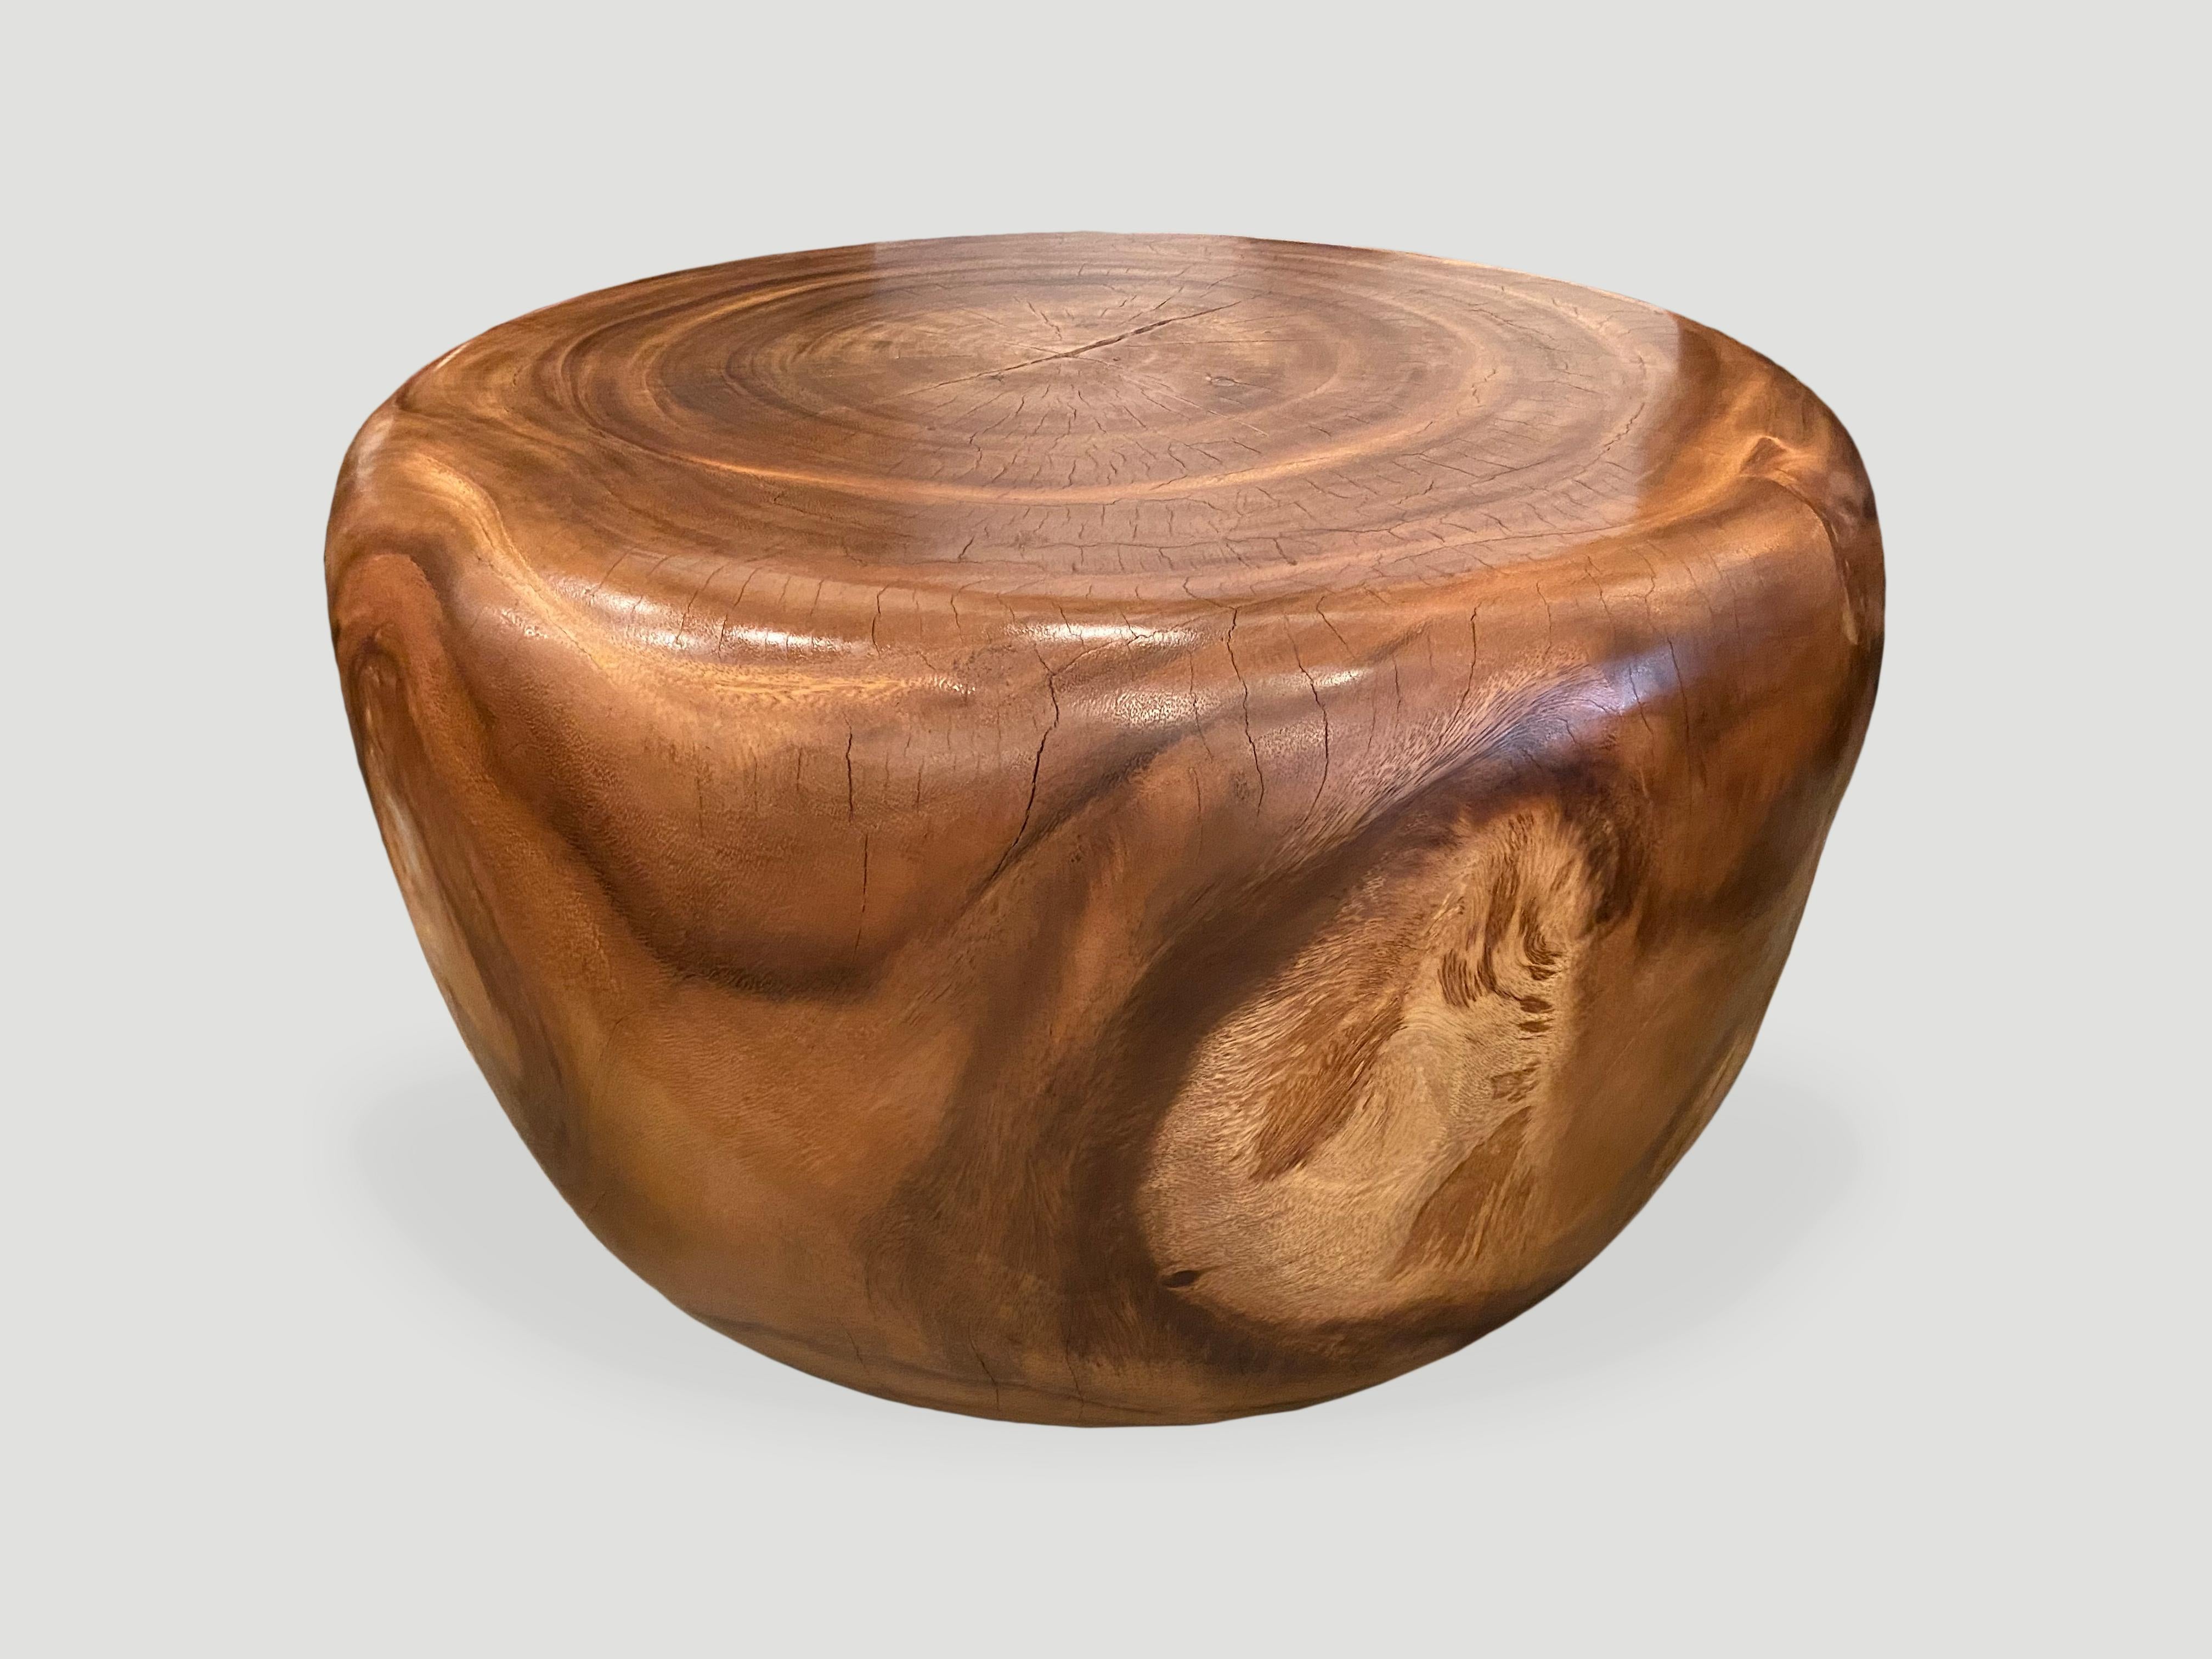 Beautiful wood grain on this reclaimed suar wood coffee table. Hand carved into an impressive drum shape. Natural oil finish. 

Own an Andrianna Shamaris original.

Andrianna Shamaris. The Leader In Modern Organic Design.